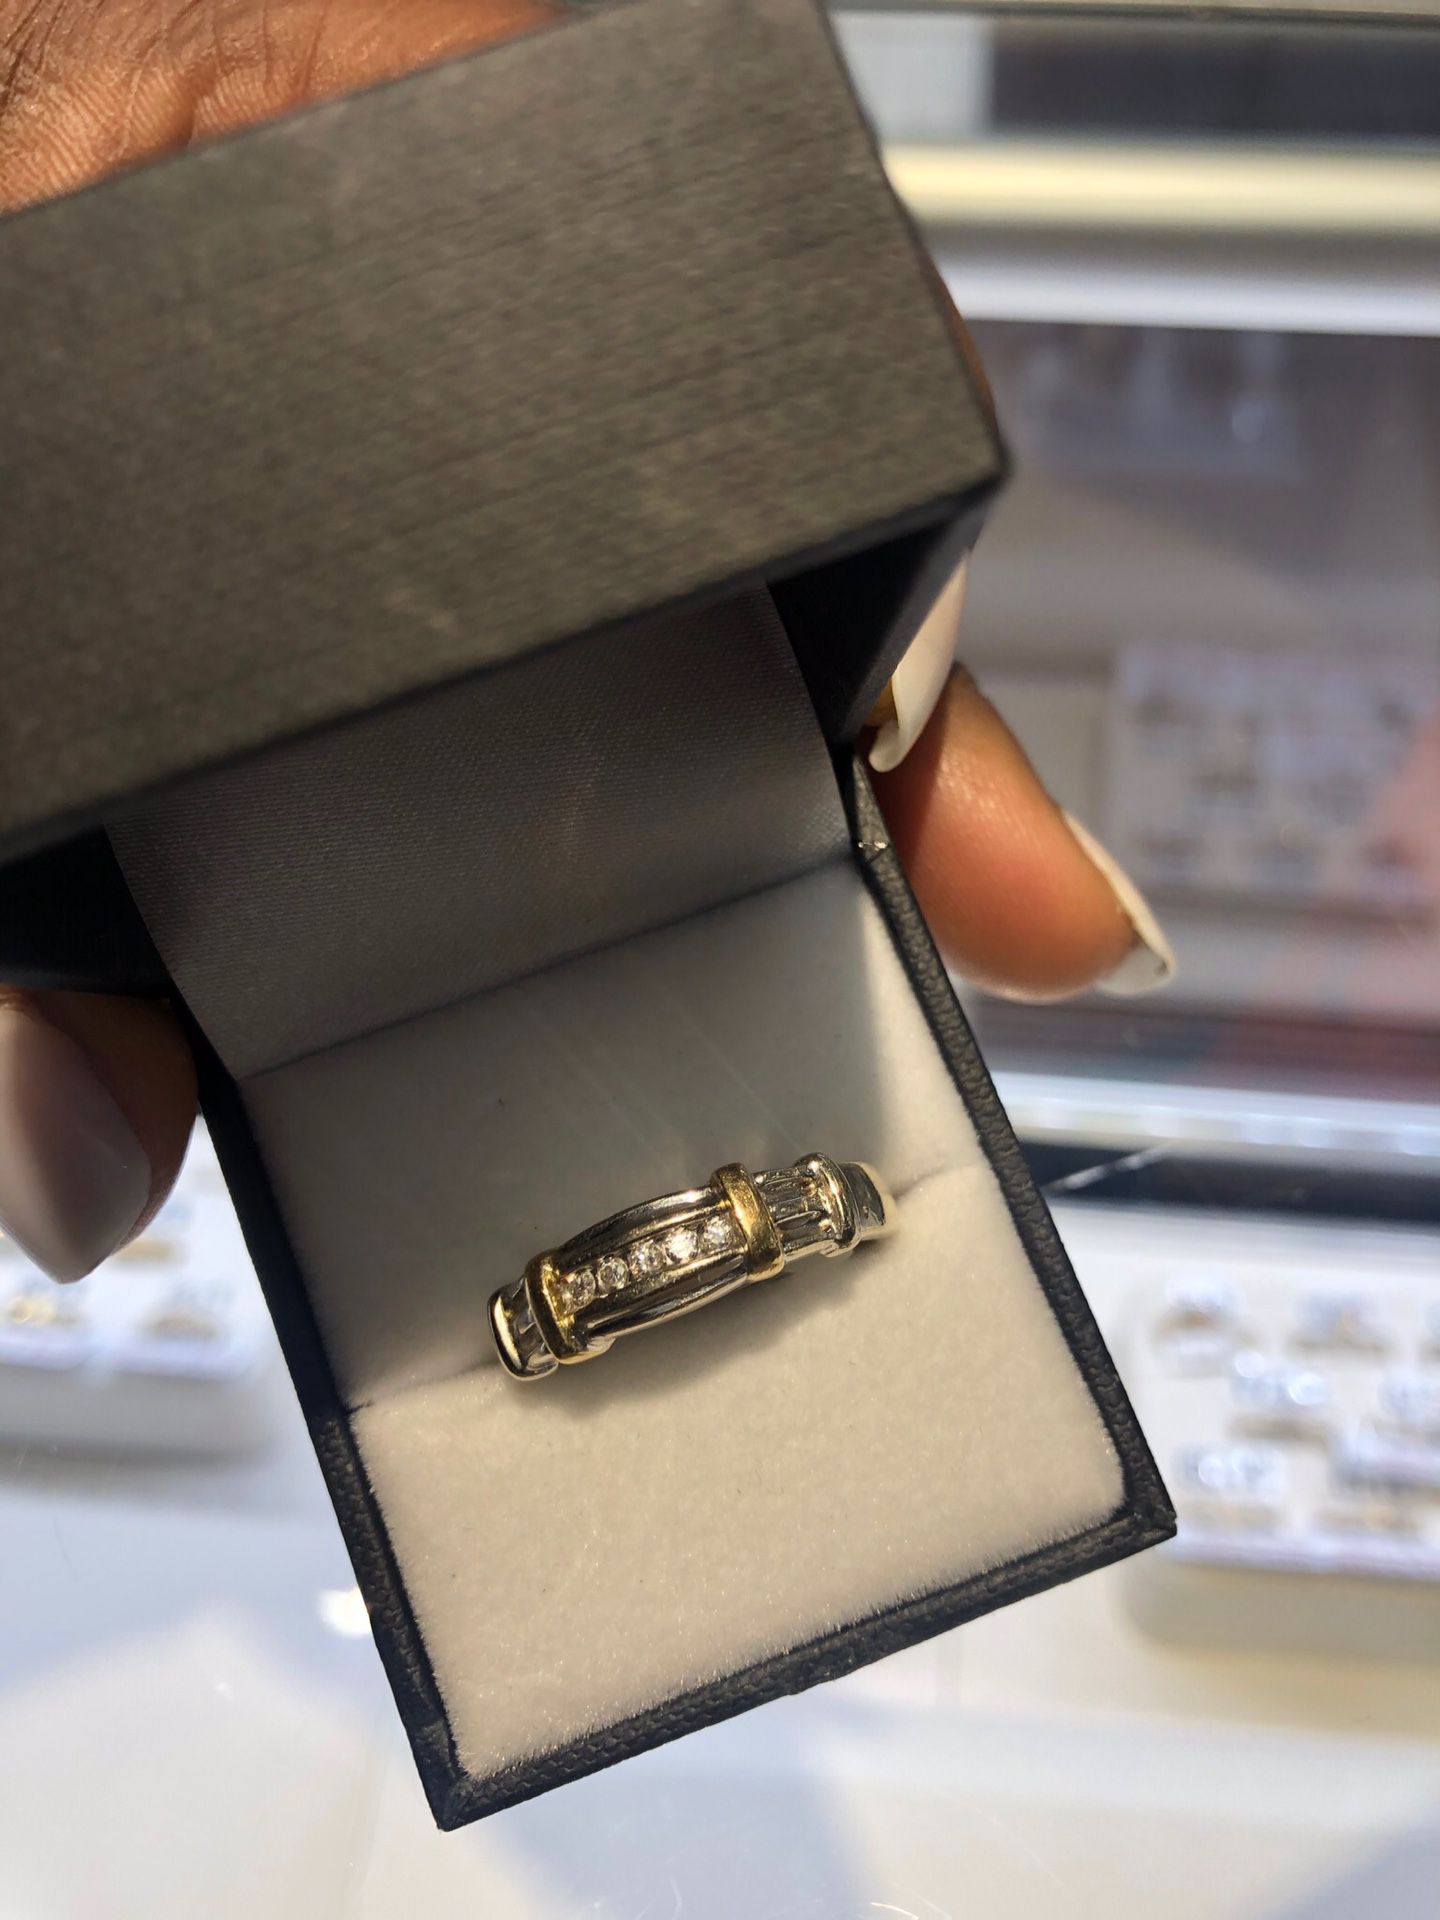 14K GOLD MENS RING ($40 TO PUT ON LAYAWAY)ASK FOR KEEKEE